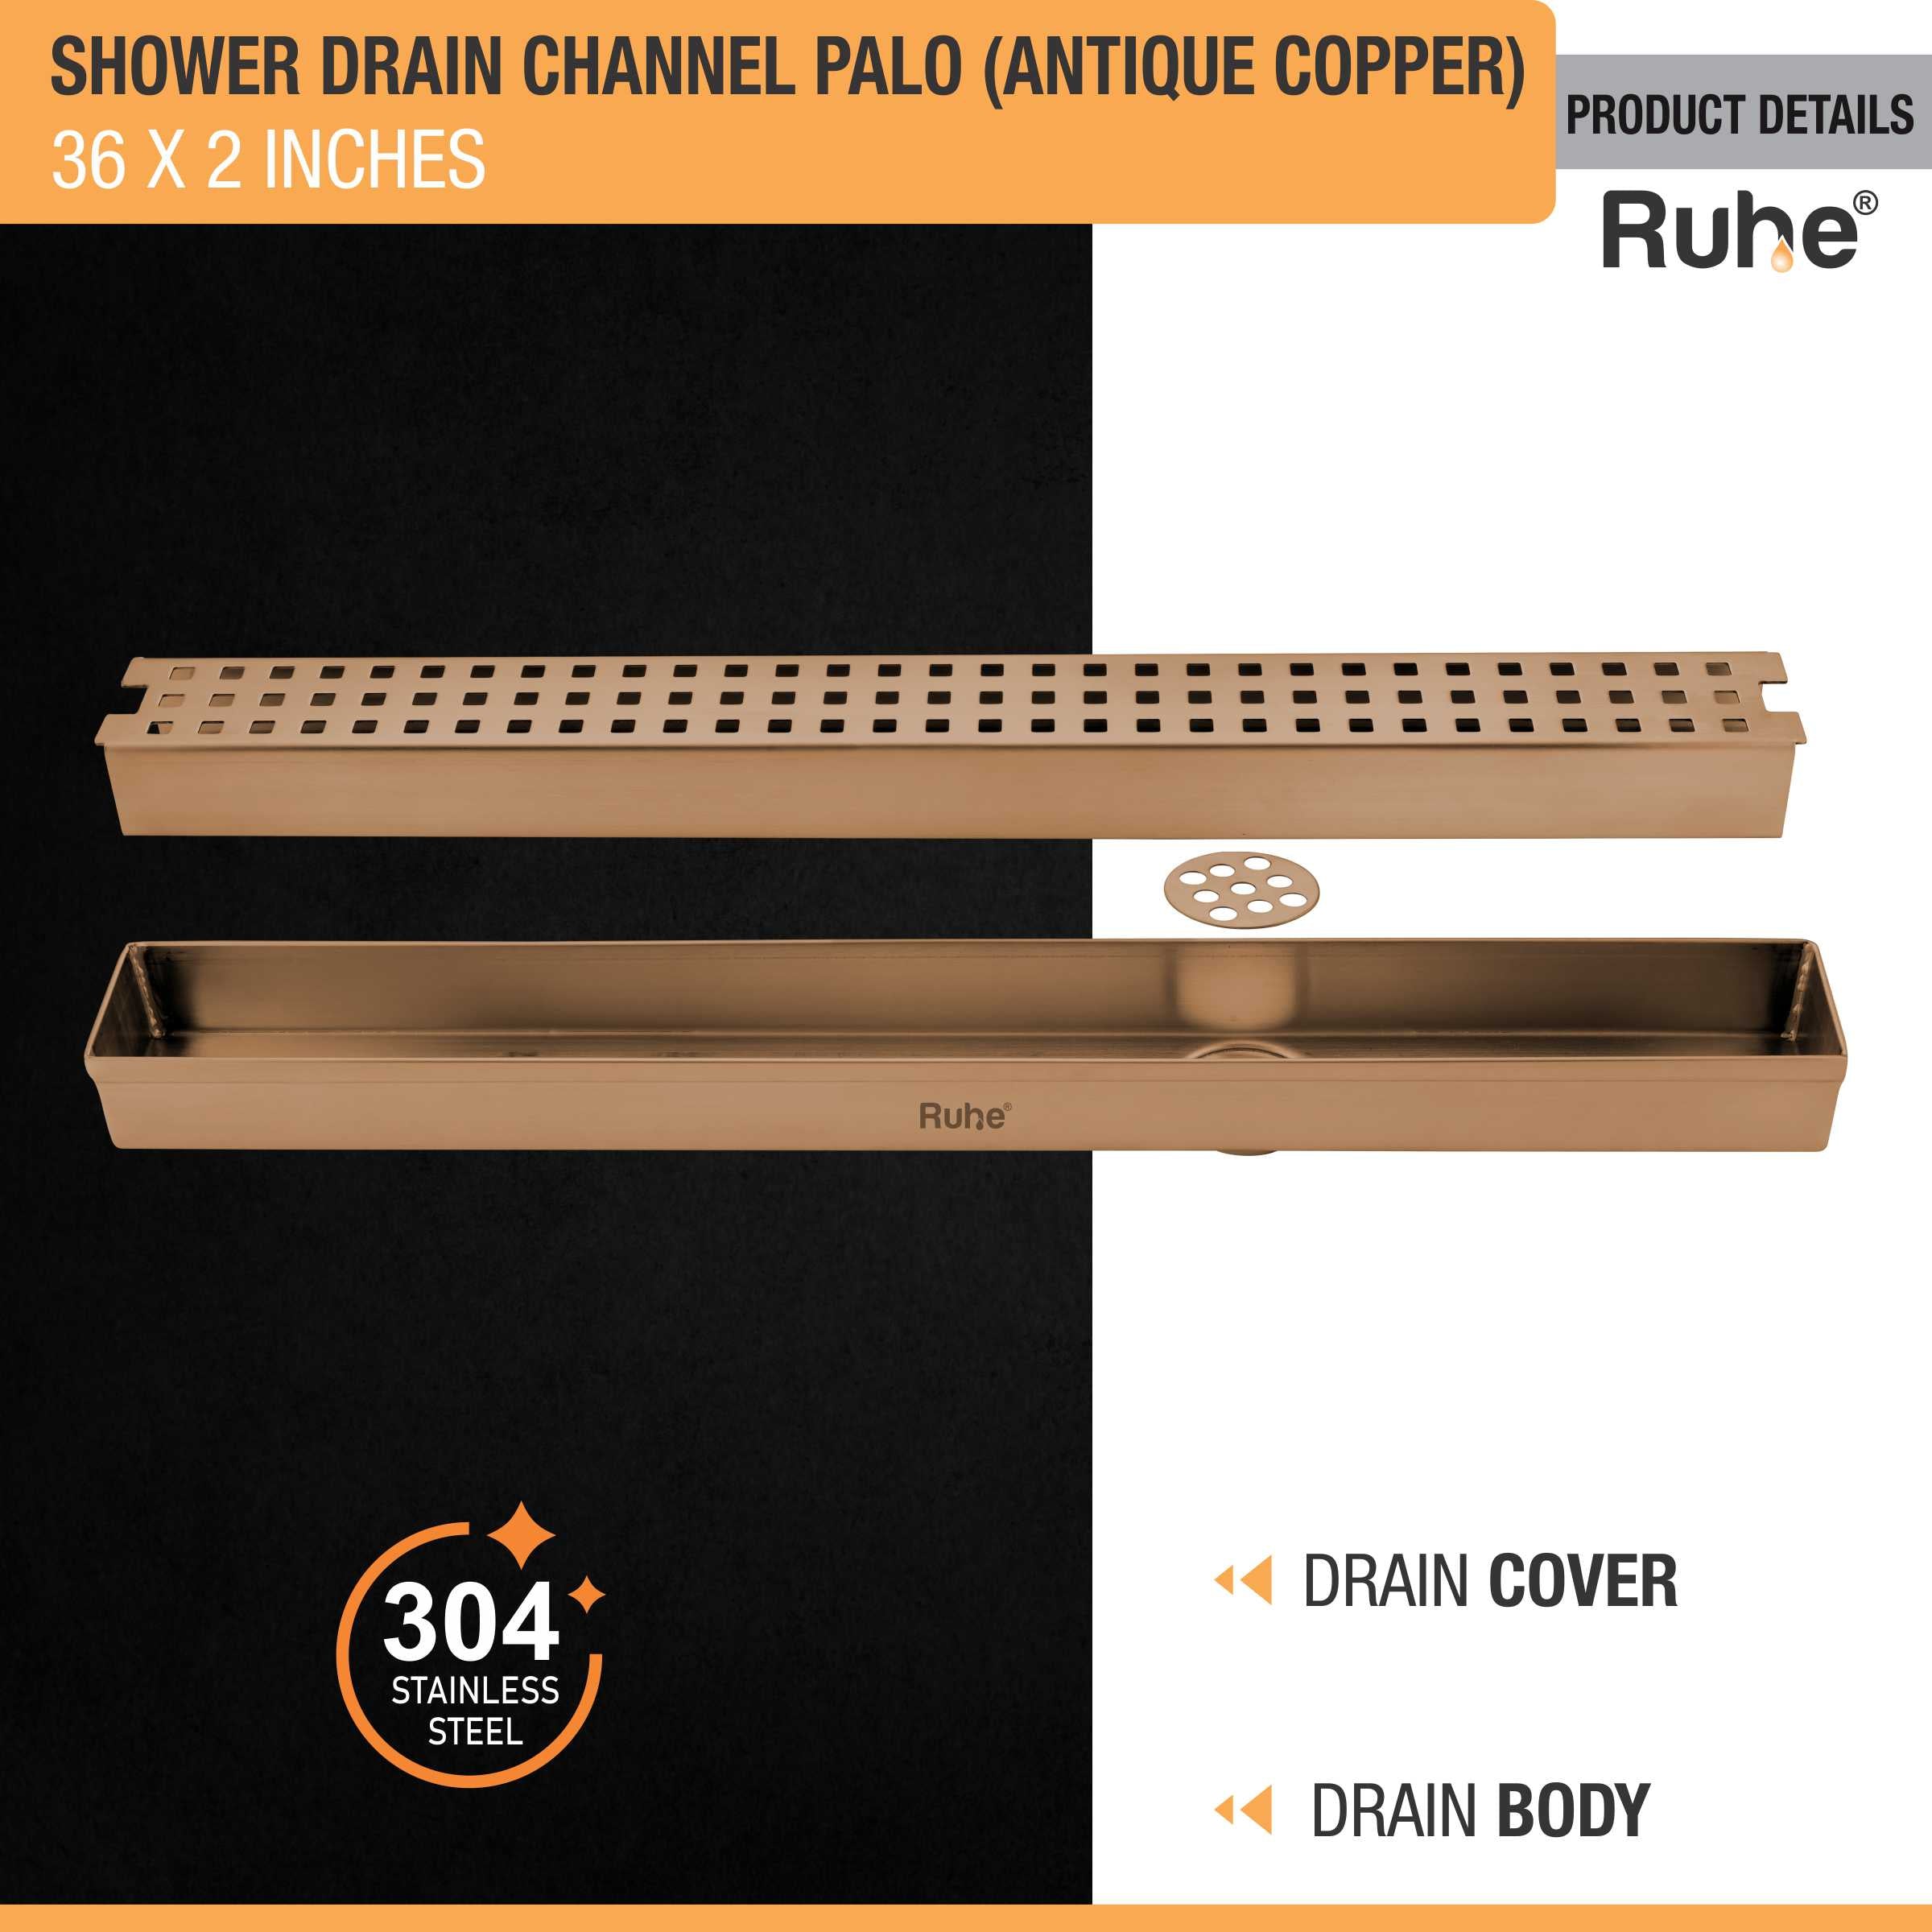 Palo Shower Drain Channel (36 x 2 Inches) ROSE GOLD/ANTIQUE COPPER product details